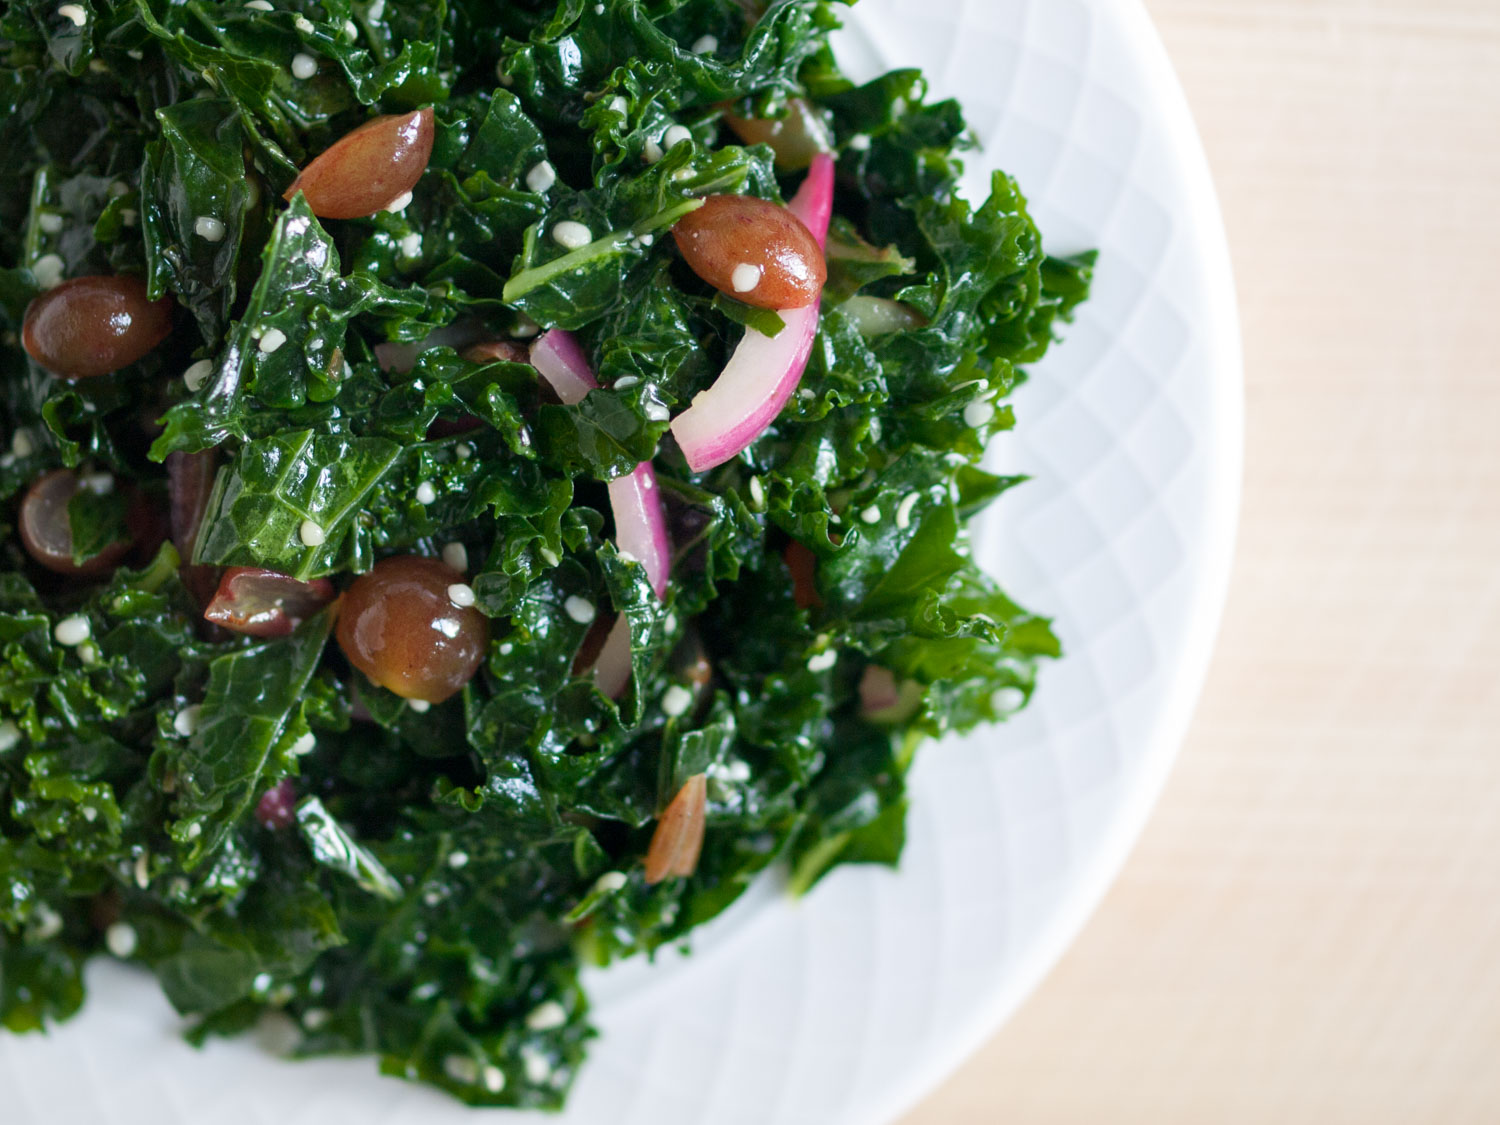 Kale Salad with Grapes